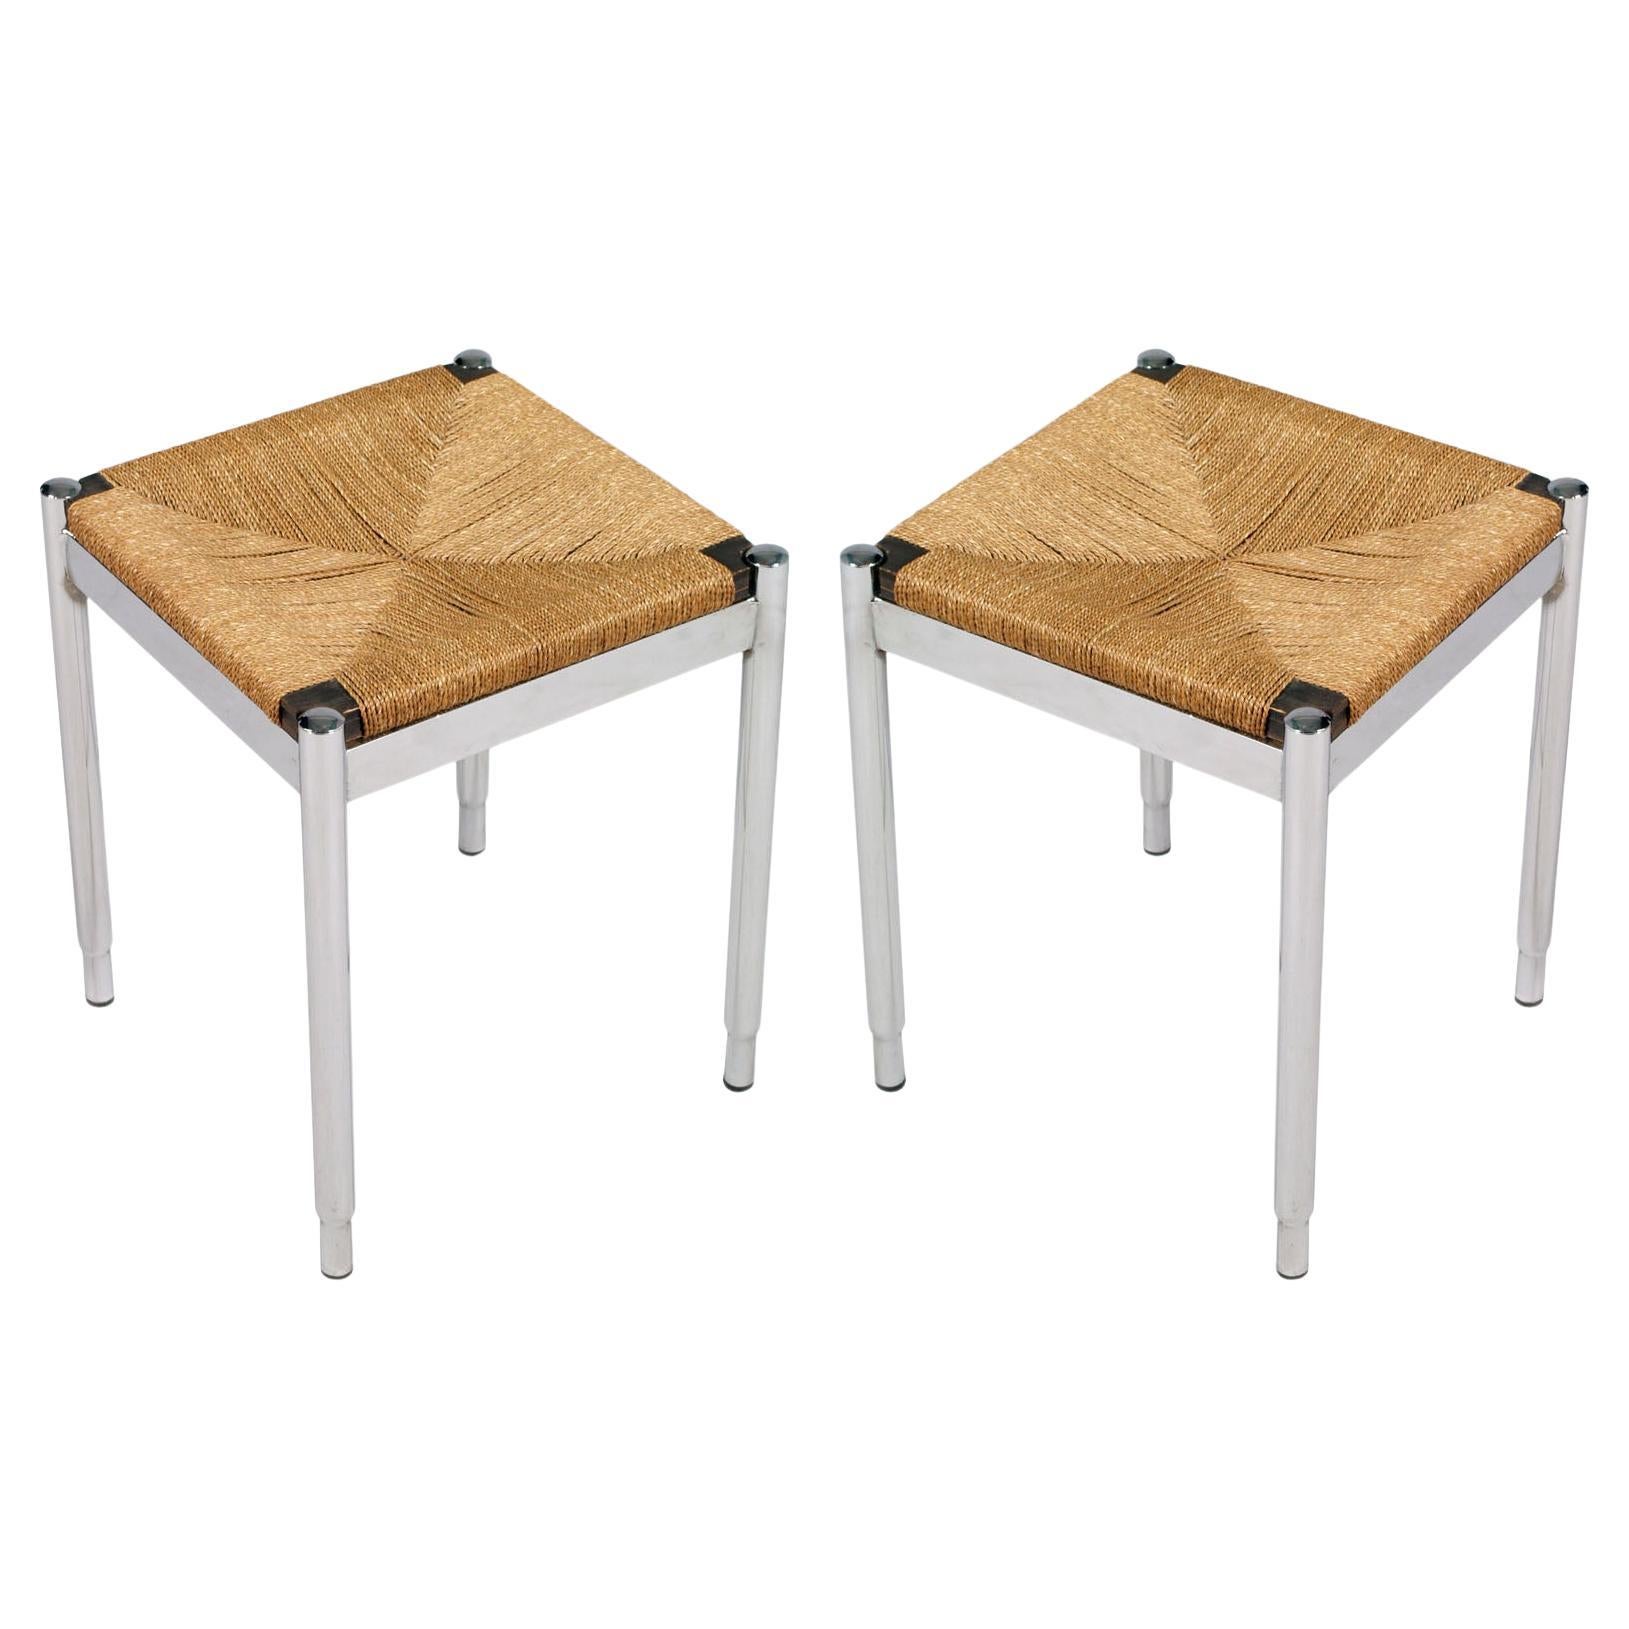 Pair Stools by Gio Ponti for Cassina attributed , Chromed Steel Straw and Wood